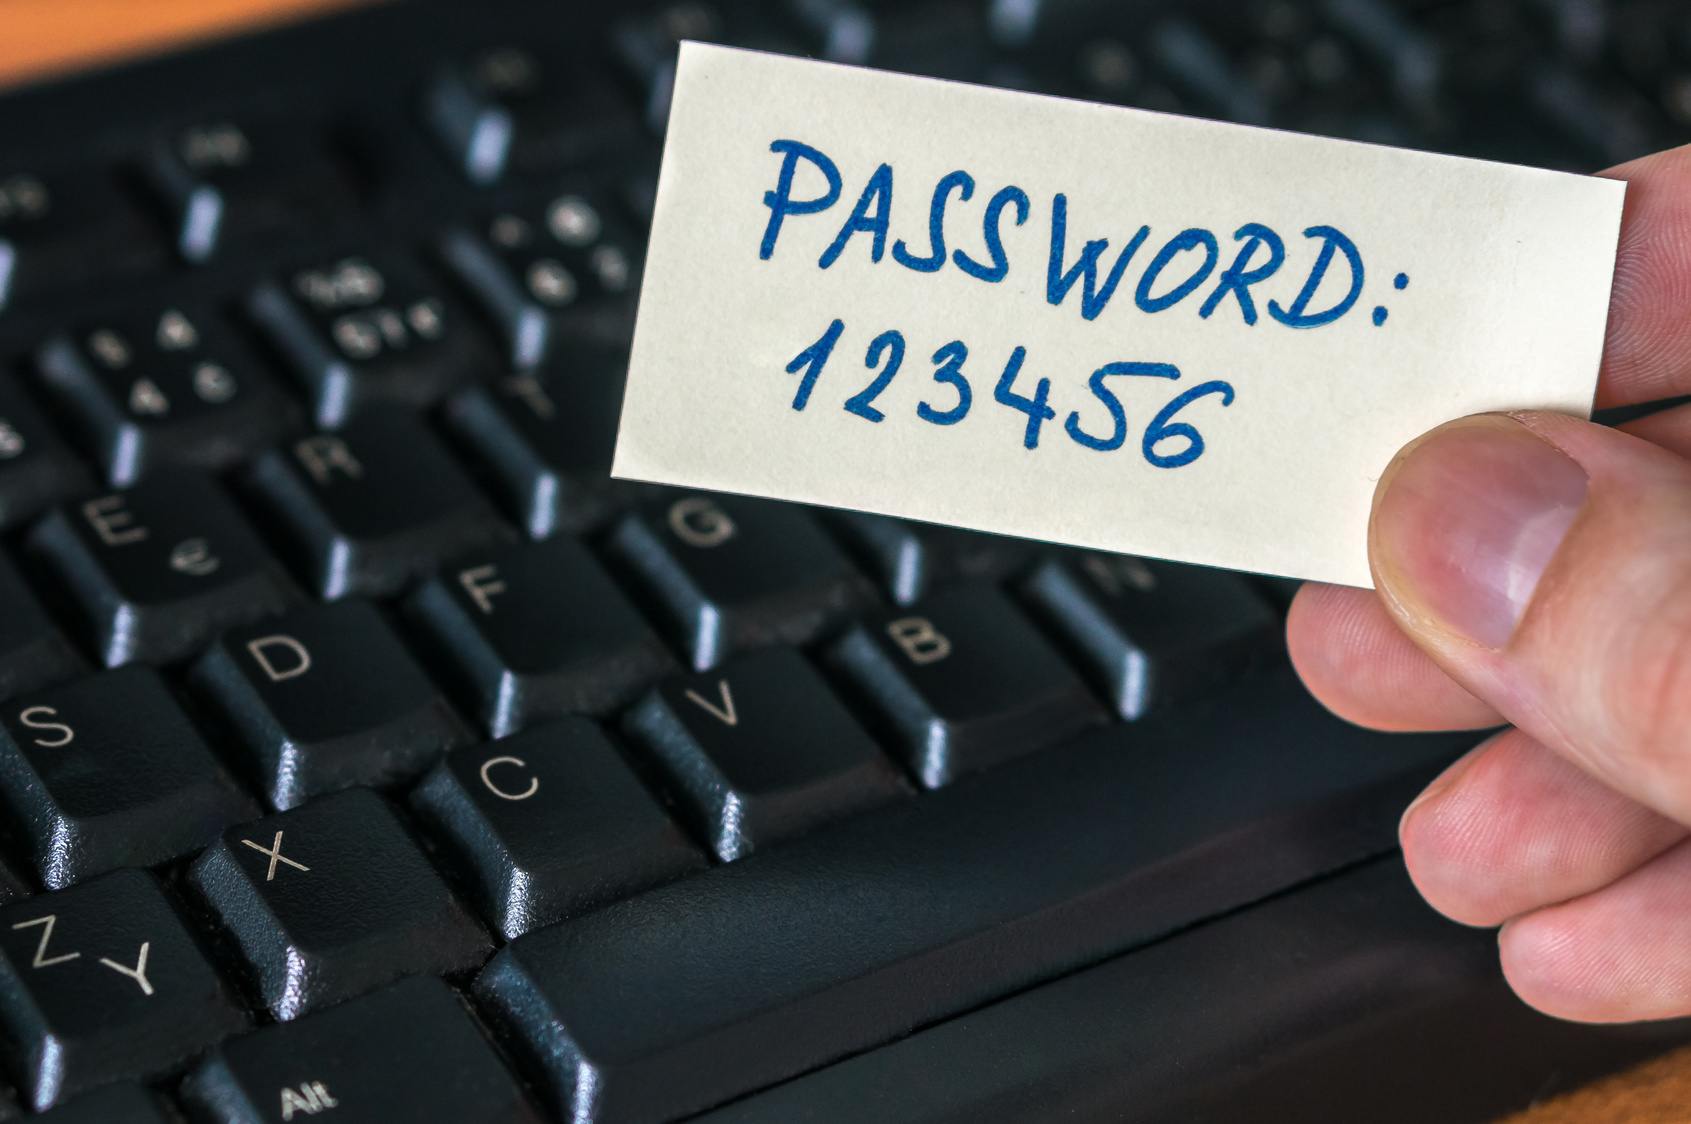 Managing Your Passwords Wisely